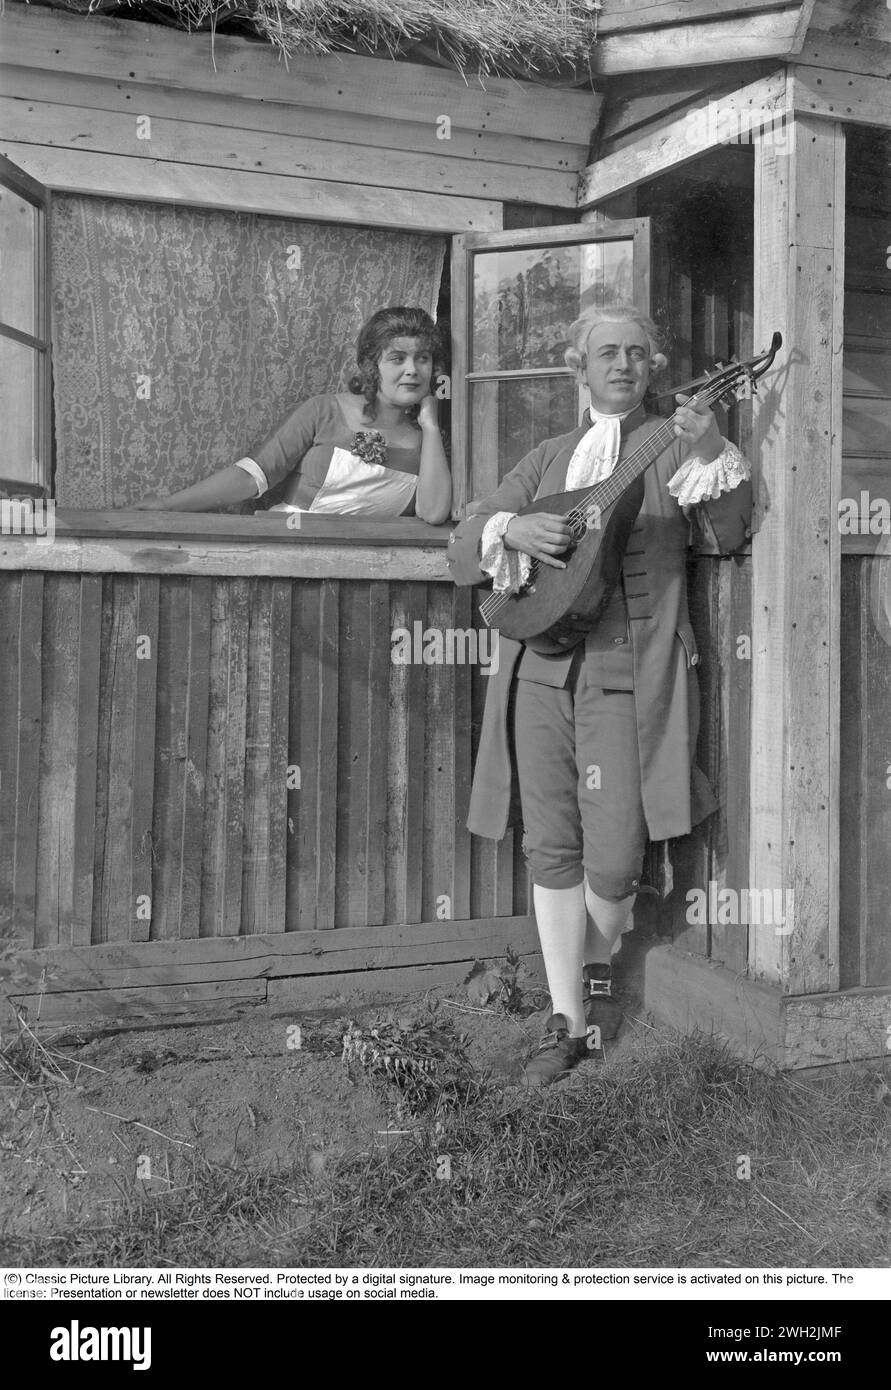 Historical event recreated. A man dressed as the famous Swedish poet Carl Michael Bellman dressed in period clothes of the 18th century playing a lute while a woman stands in the window next to him and listens. Hagateatern Stockholm 1930s Stock Photo